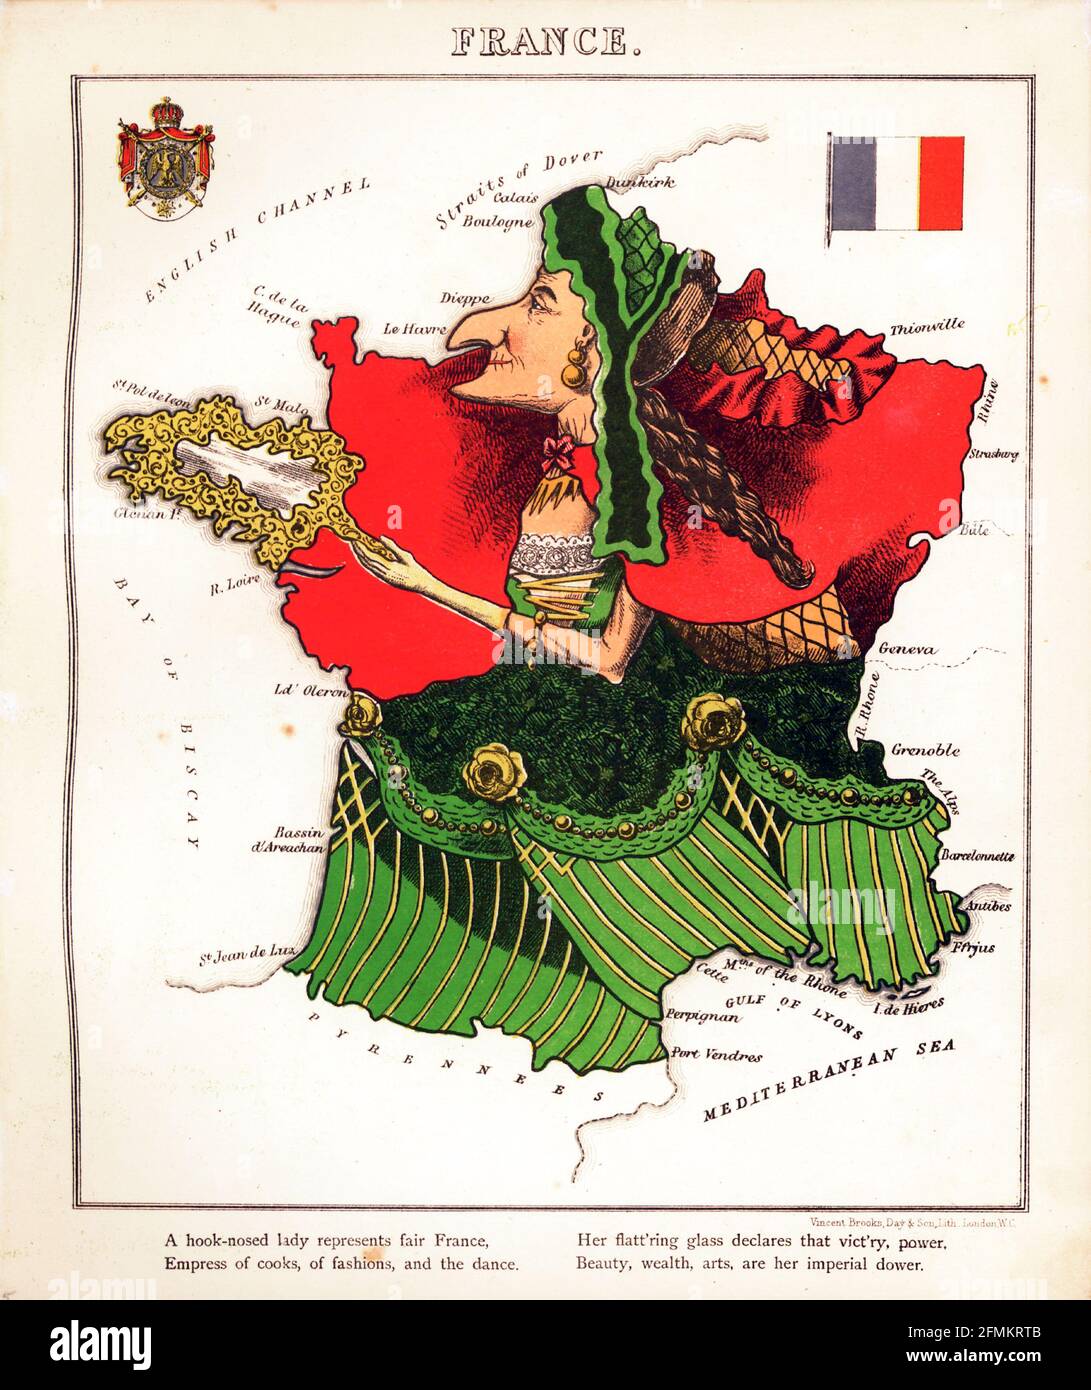 France – geographical fun. Illustrated satirical / cartographic map. Published in London by the firm of Hodder and Stoughton in 1869. Stock Photo